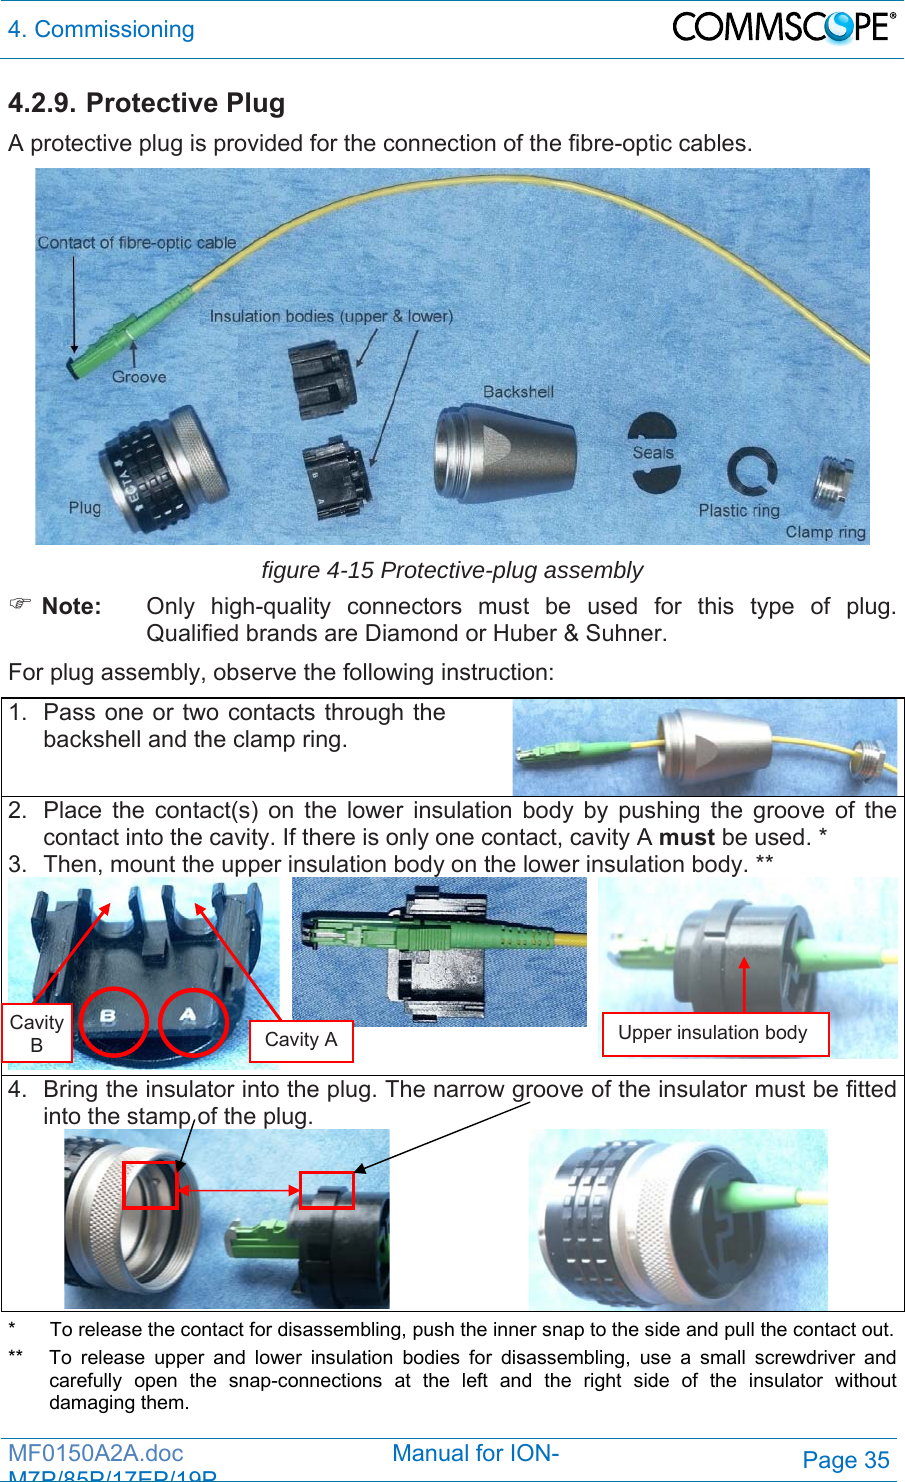 4. Commissioning  MF0150A2A.doc                                Manual for ION-M7P/85P/17EP/19PPage 35 4.2.9. Protective Plug A protective plug is provided for the connection of the fibre-optic cables.  figure 4-15 Protective-plug assembly  Note:  Only high-quality connectors must be used for this type of plug. Qualified brands are Diamond or Huber &amp; Suhner. For plug assembly, observe the following instruction: 1.  Pass one or two contacts through the backshell and the clamp ring.  2.  Place the contact(s) on the lower insulation body by pushing the groove of the contact into the cavity. If there is only one contact, cavity A must be used. * 3.  Then, mount the upper insulation body on the lower insulation body. **  4.  Bring the insulator into the plug. The narrow groove of the insulator must be fitted into the stamp of the plug.   *  To release the contact for disassembling, push the inner snap to the side and pull the contact out. **  To release upper and lower insulation bodies for disassembling, use a small screwdriver and carefully open the snap-connections at the left and the right side of the insulator without damaging them. Upper insulation body Cavity A Cavity B 